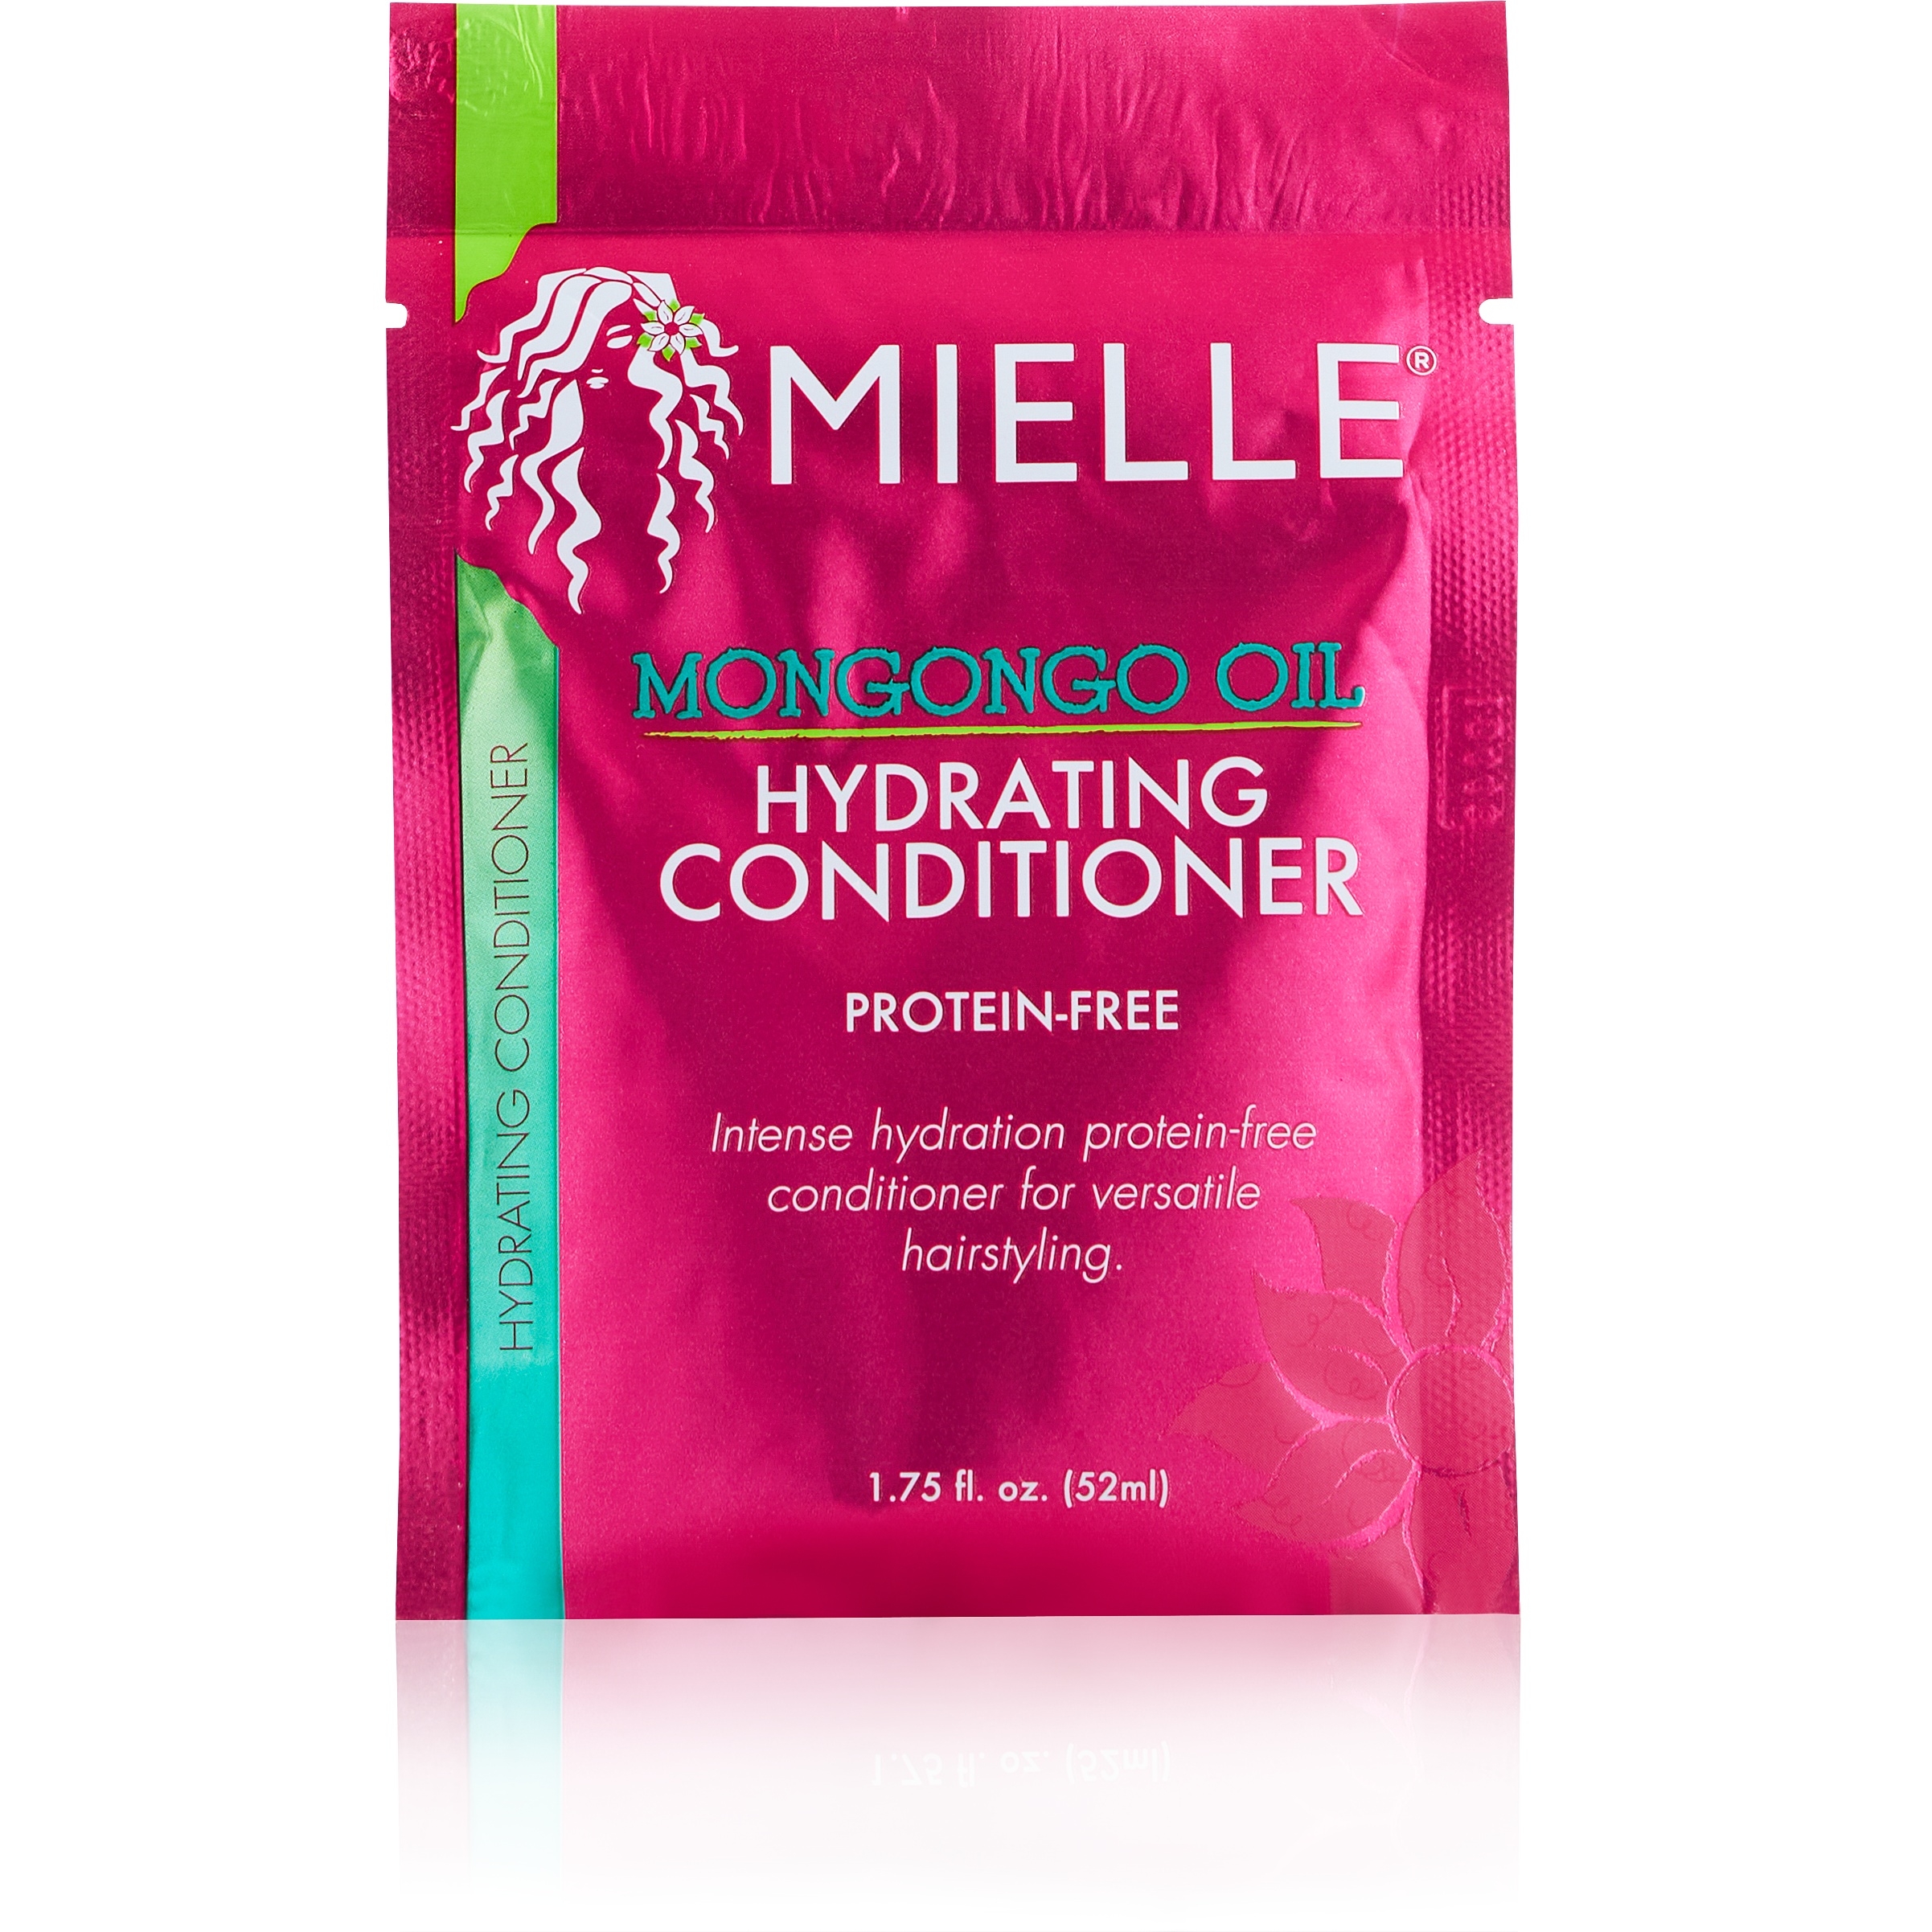 Mielle Mongongo Oil Hydrating Conditioner (pack of 12)